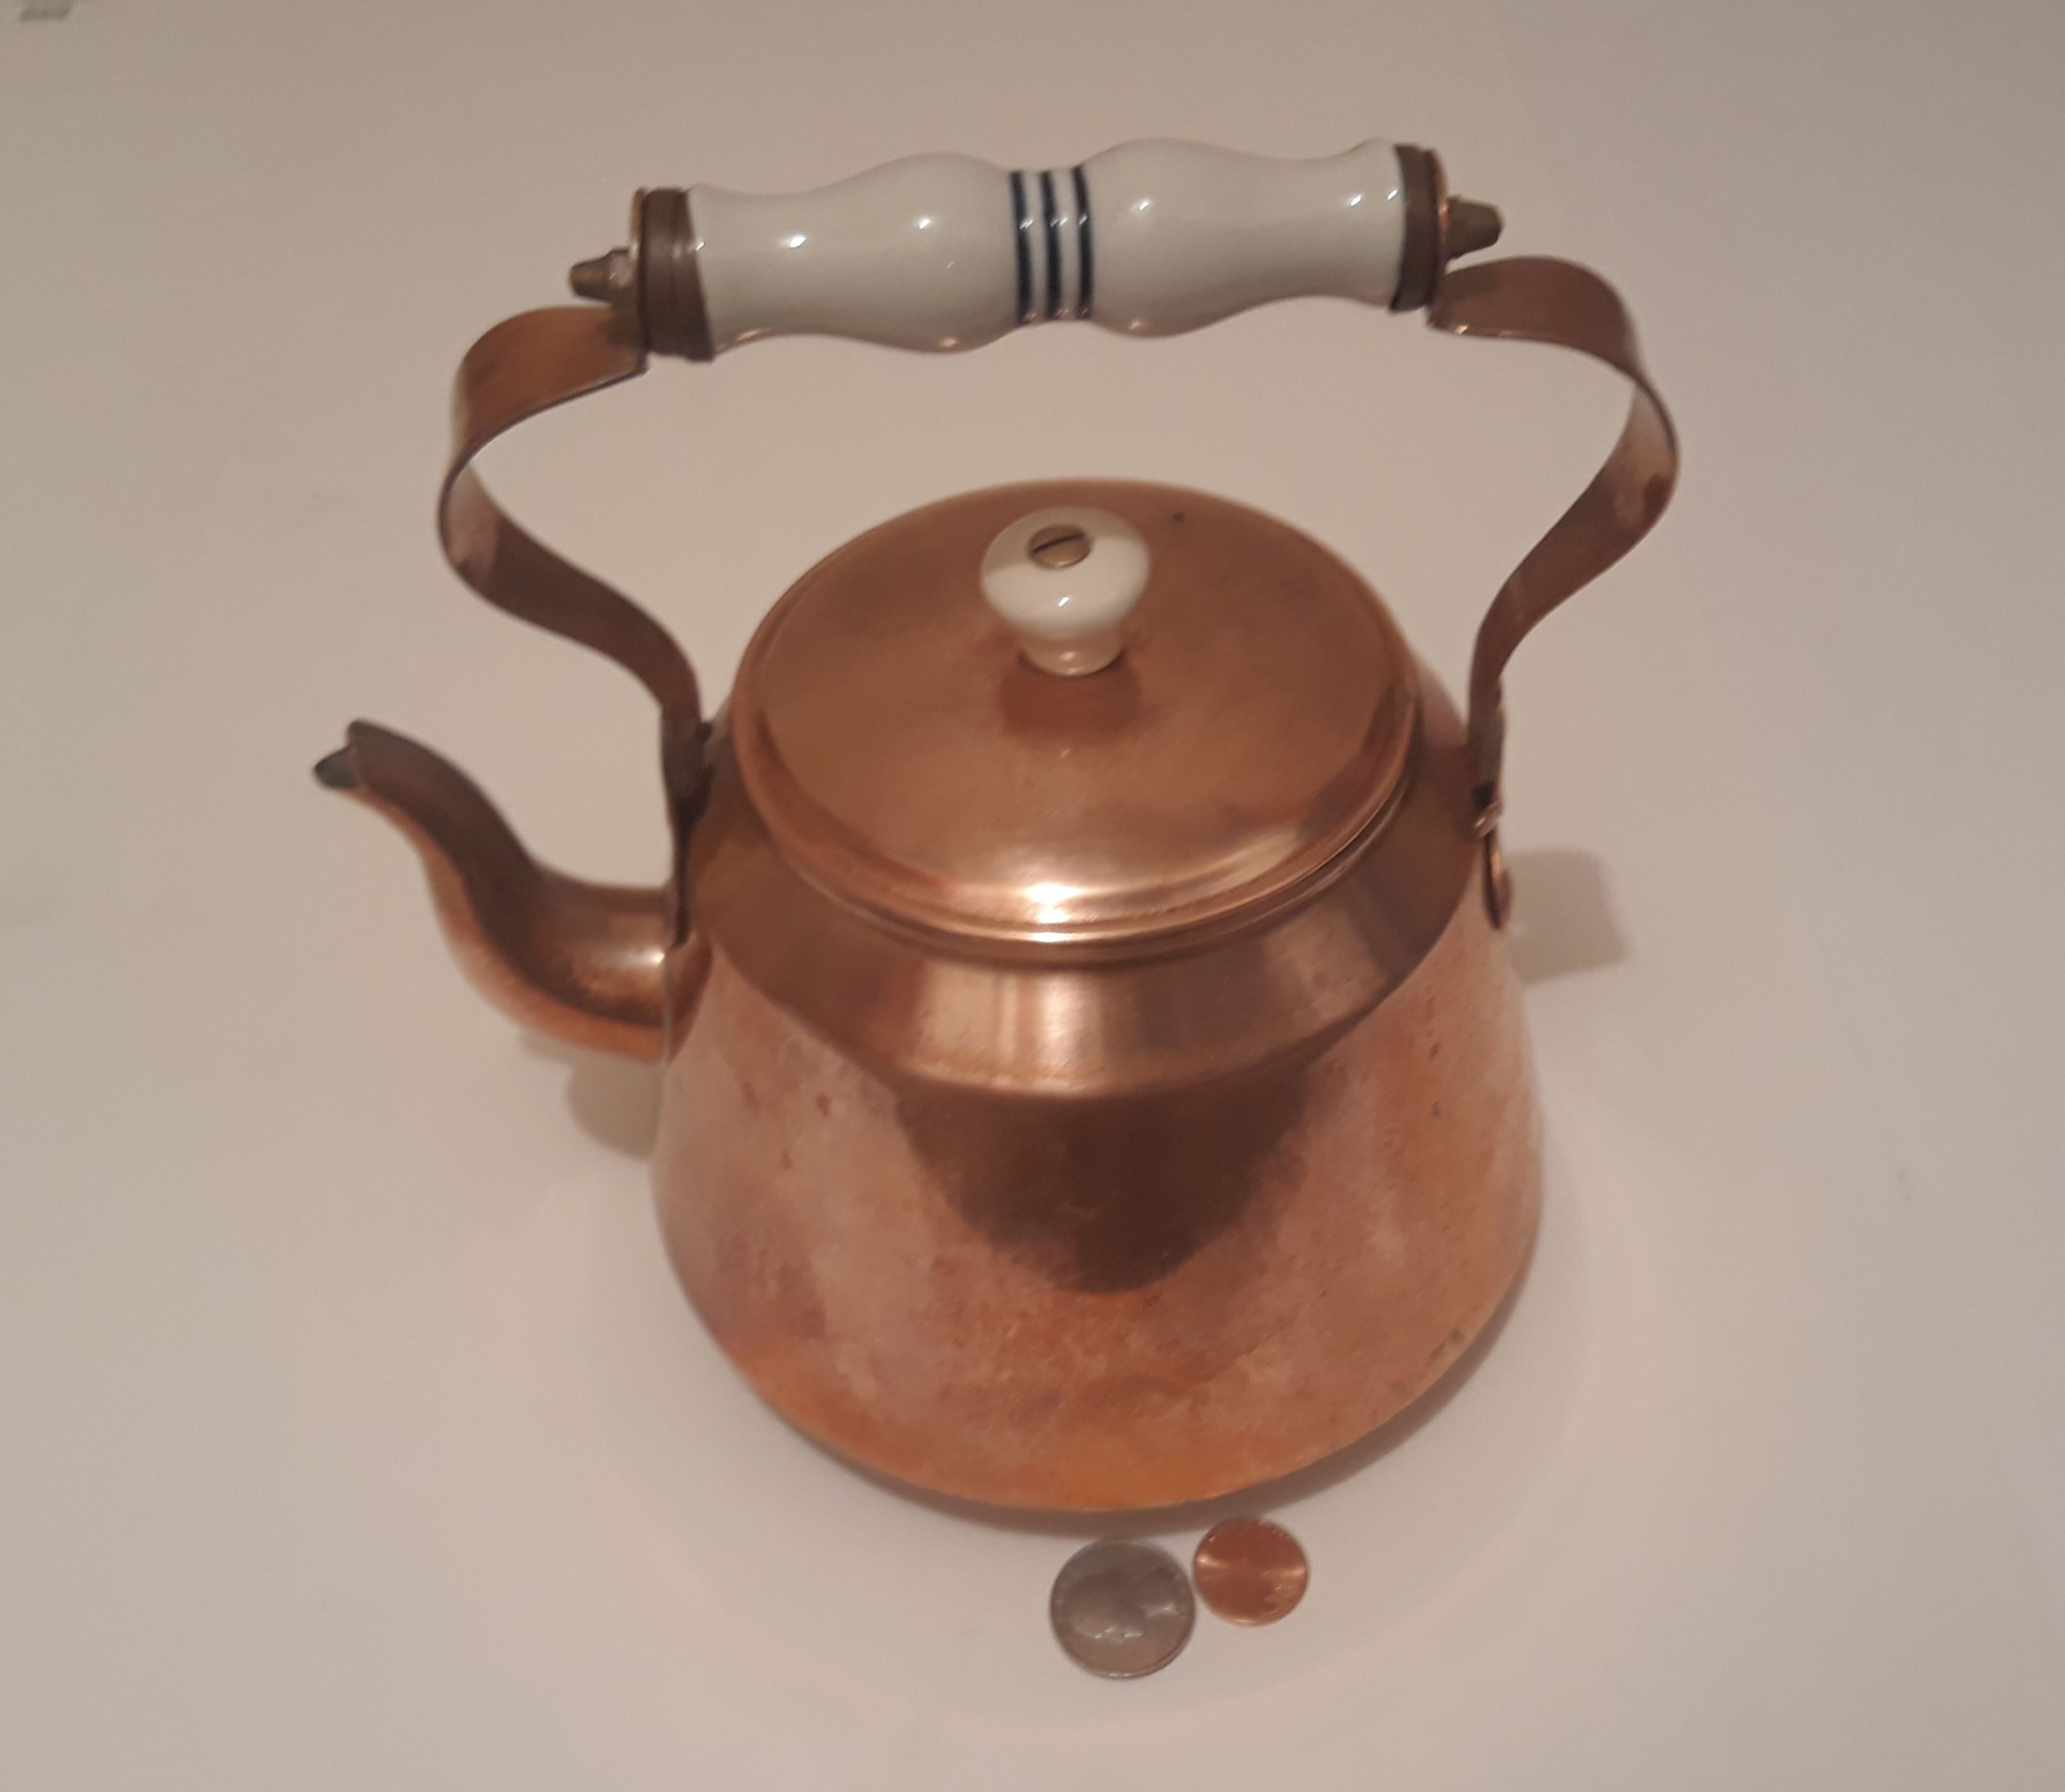 Vintage Metal Copper and Brass Tea Pot, Tea Kettle, 9" x 8", Kitchen Decor, Shelf Display, This Can Be Shined Up Even More